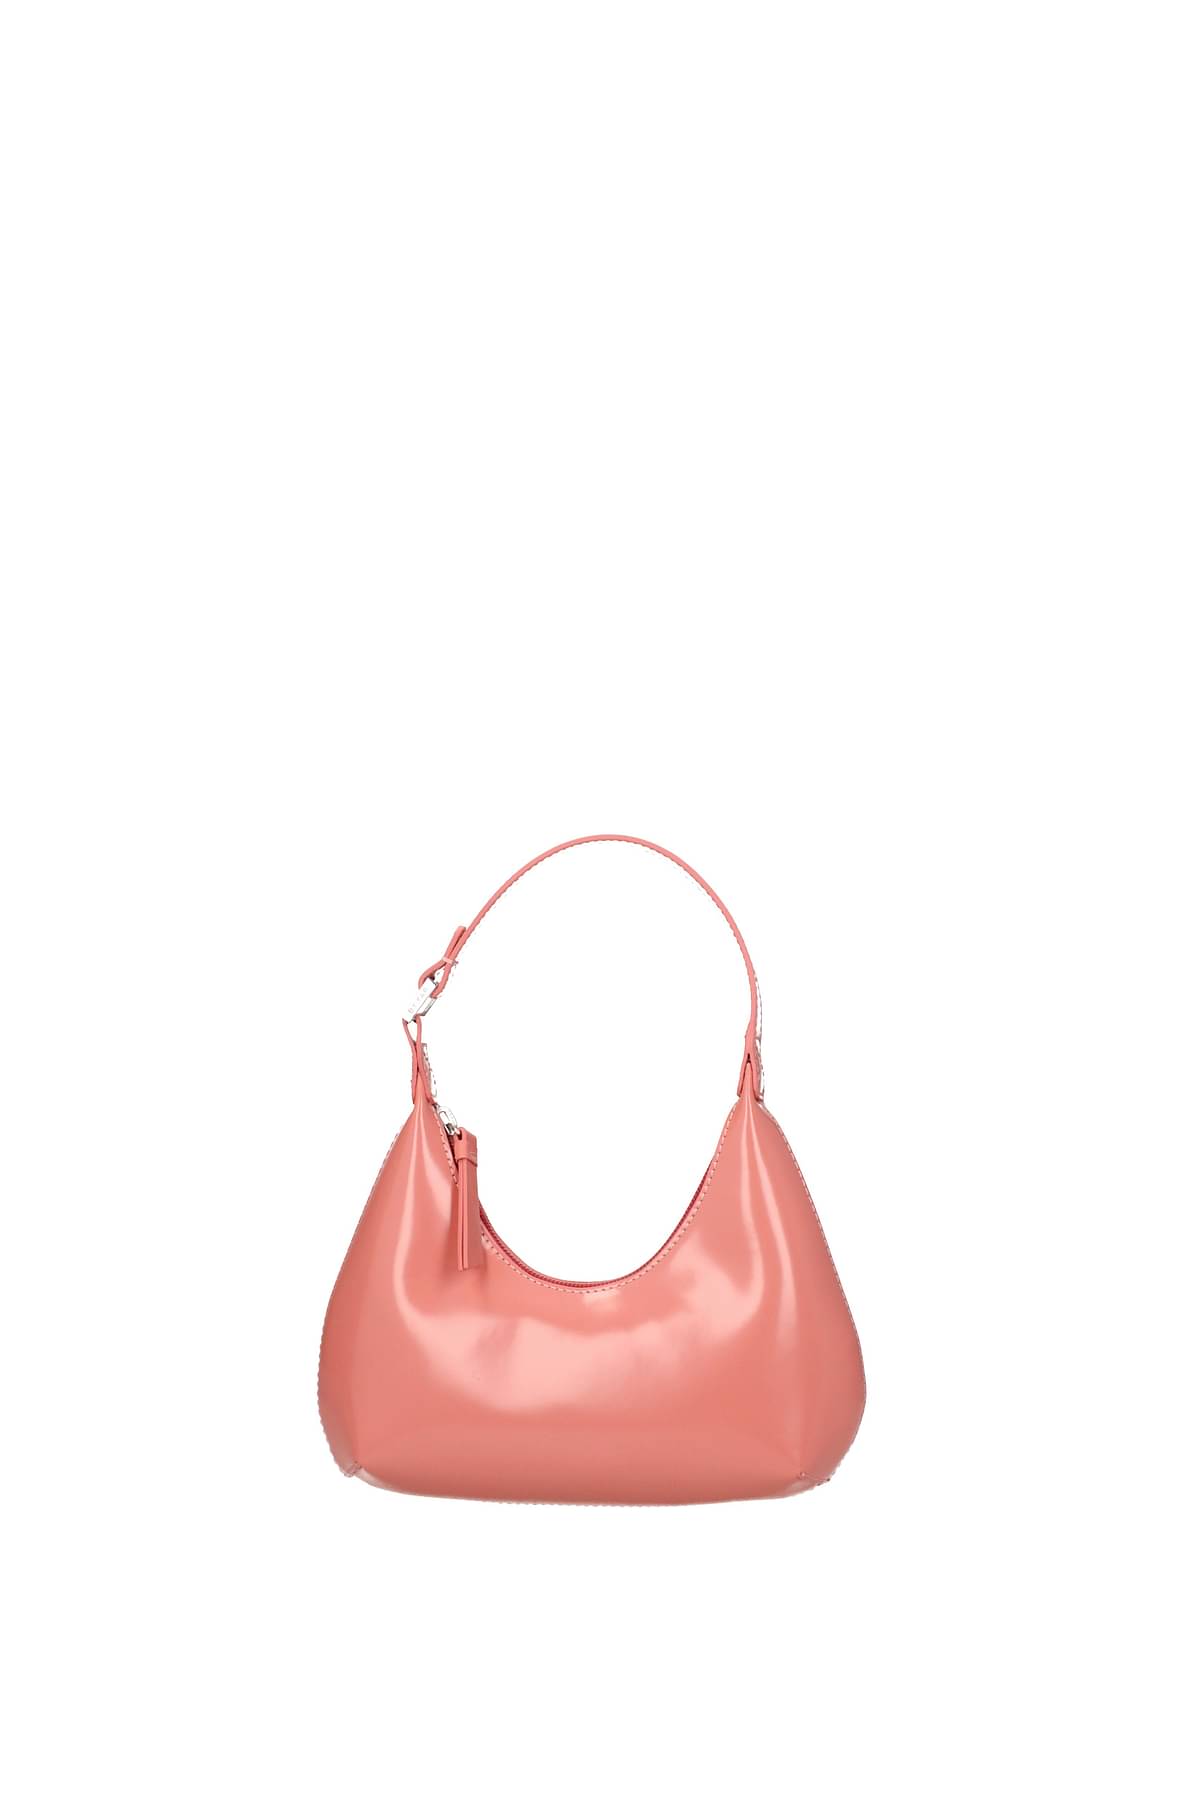 BY FAR Baby Amber Bag